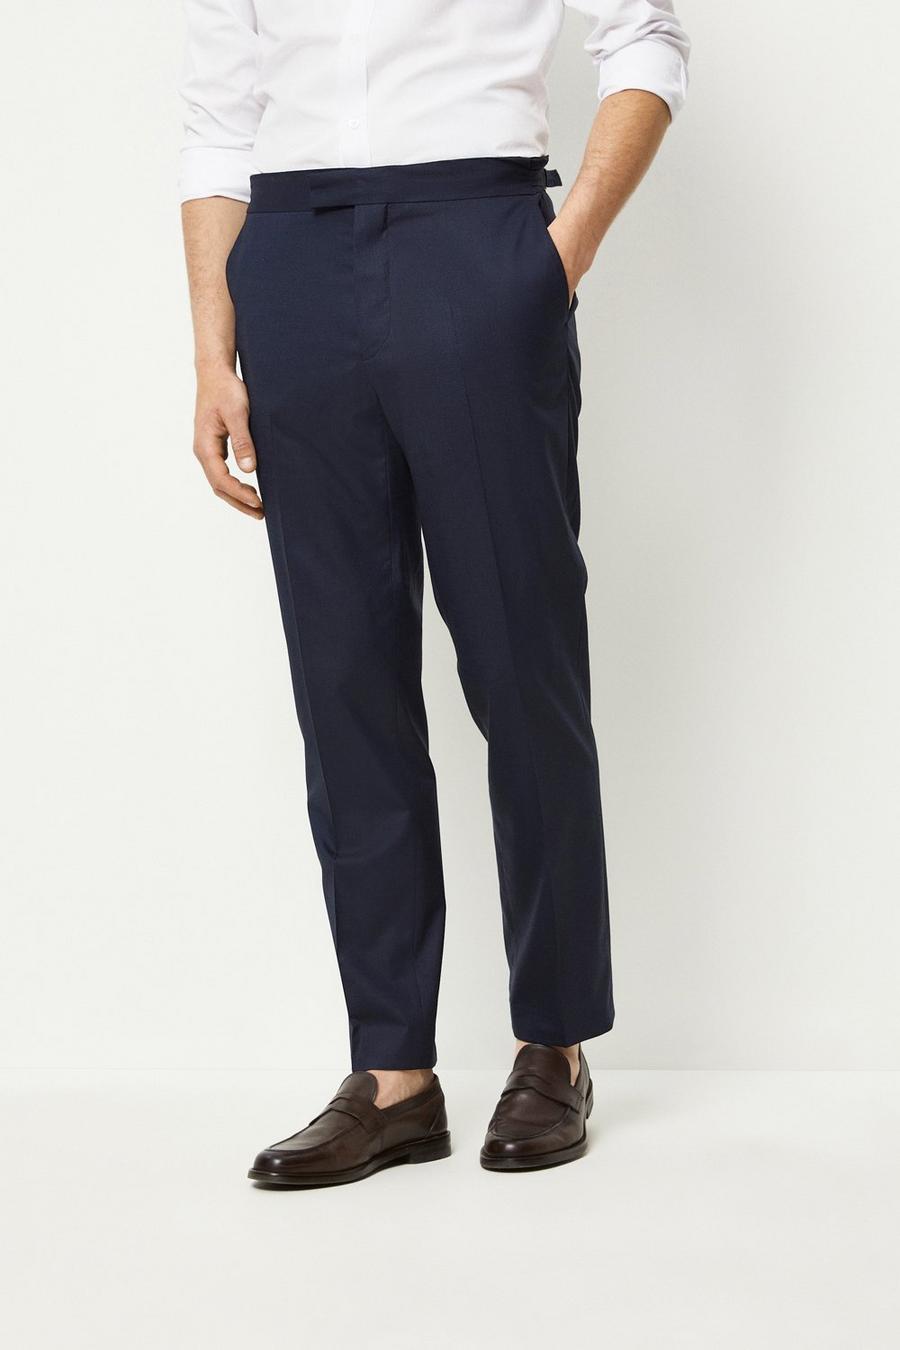 1904 Tailored Fit Navy Suit Trouser